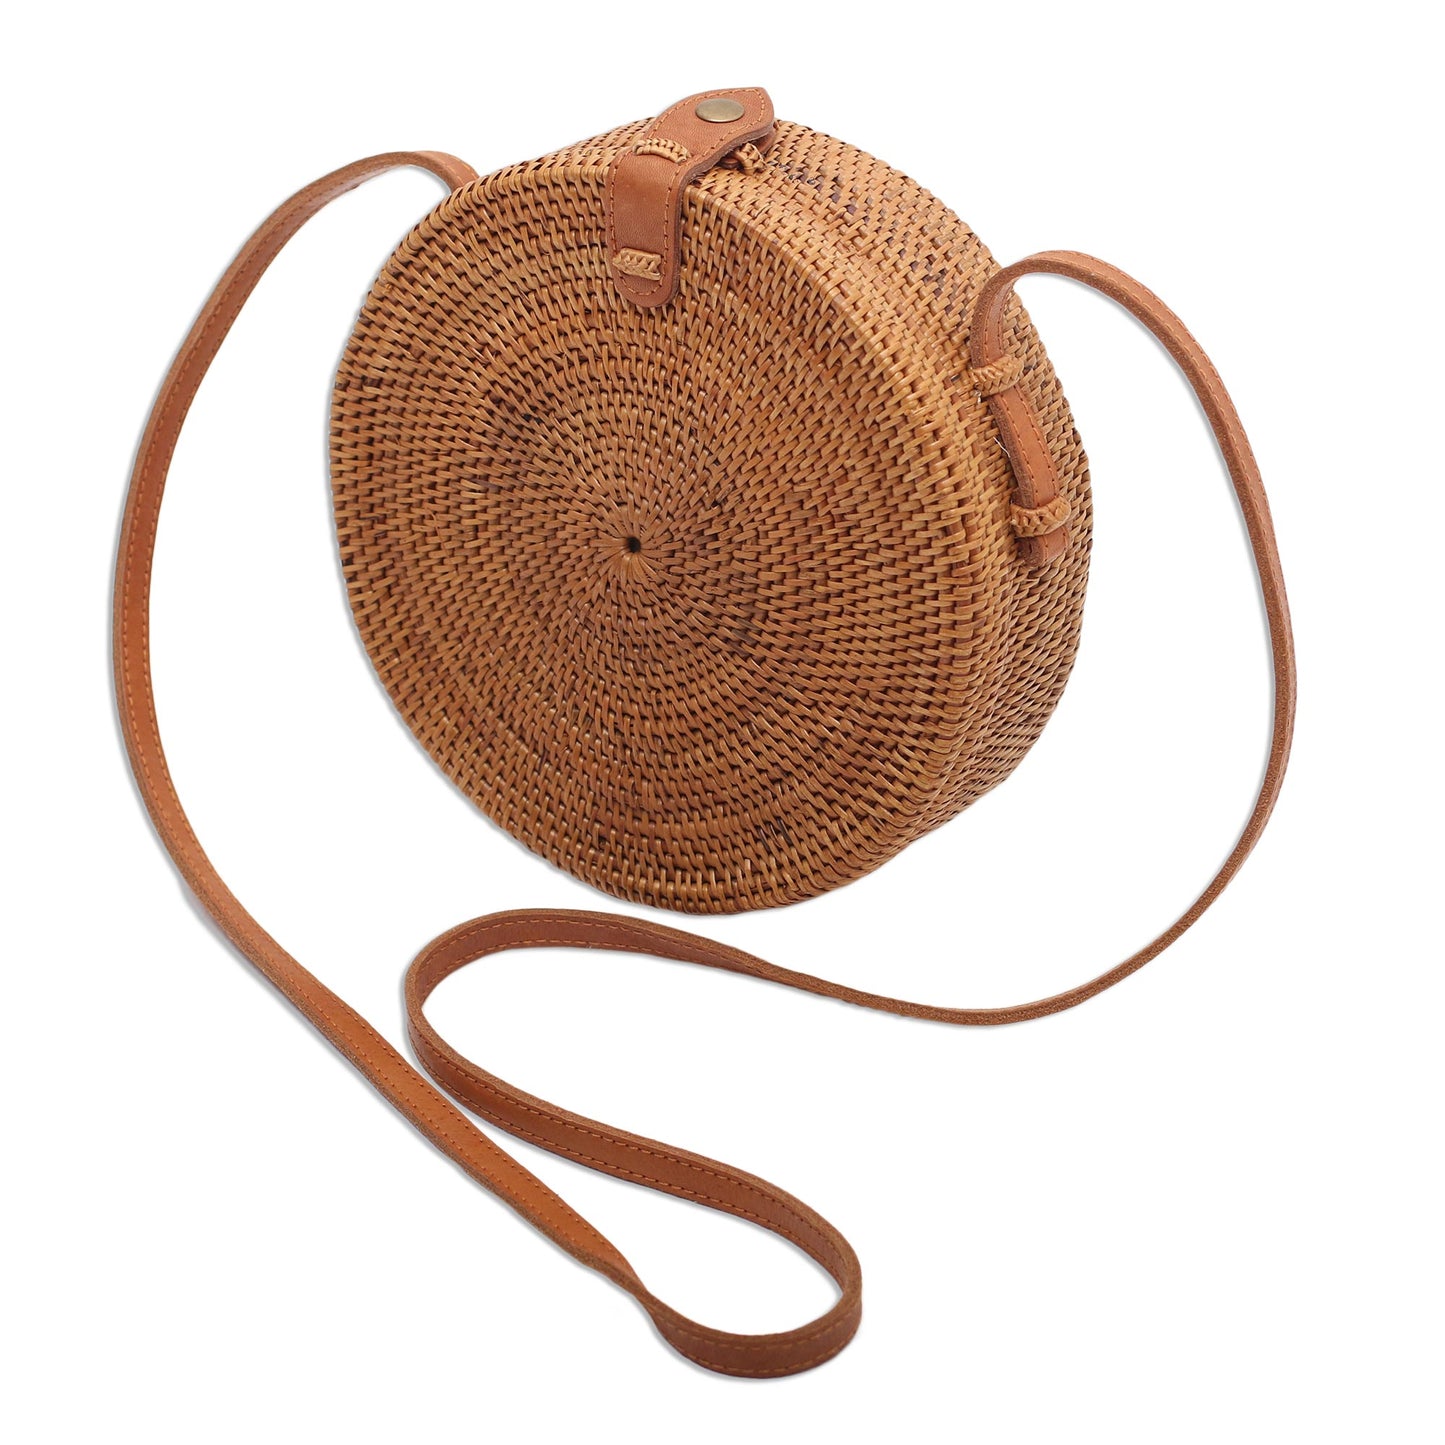 Happy Tradition Round Woven Bamboo and Ate Grass Shoulder Bag